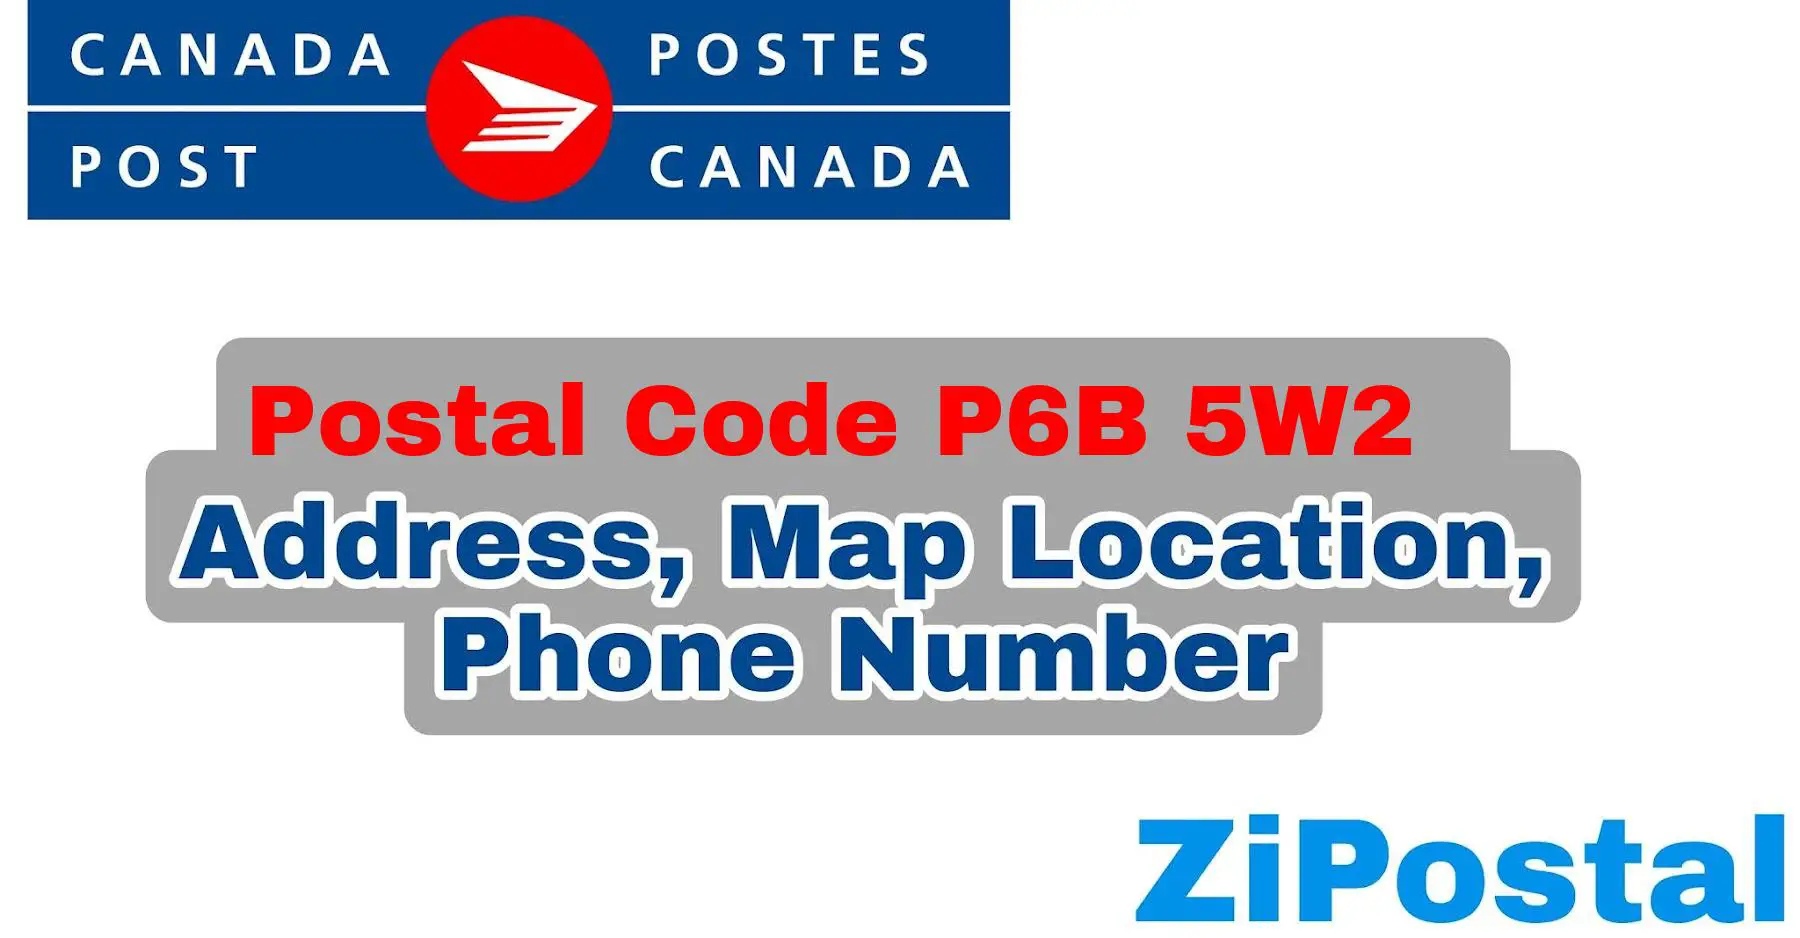 Postal Code P6B 5W2 Address Map Location and Phone Number